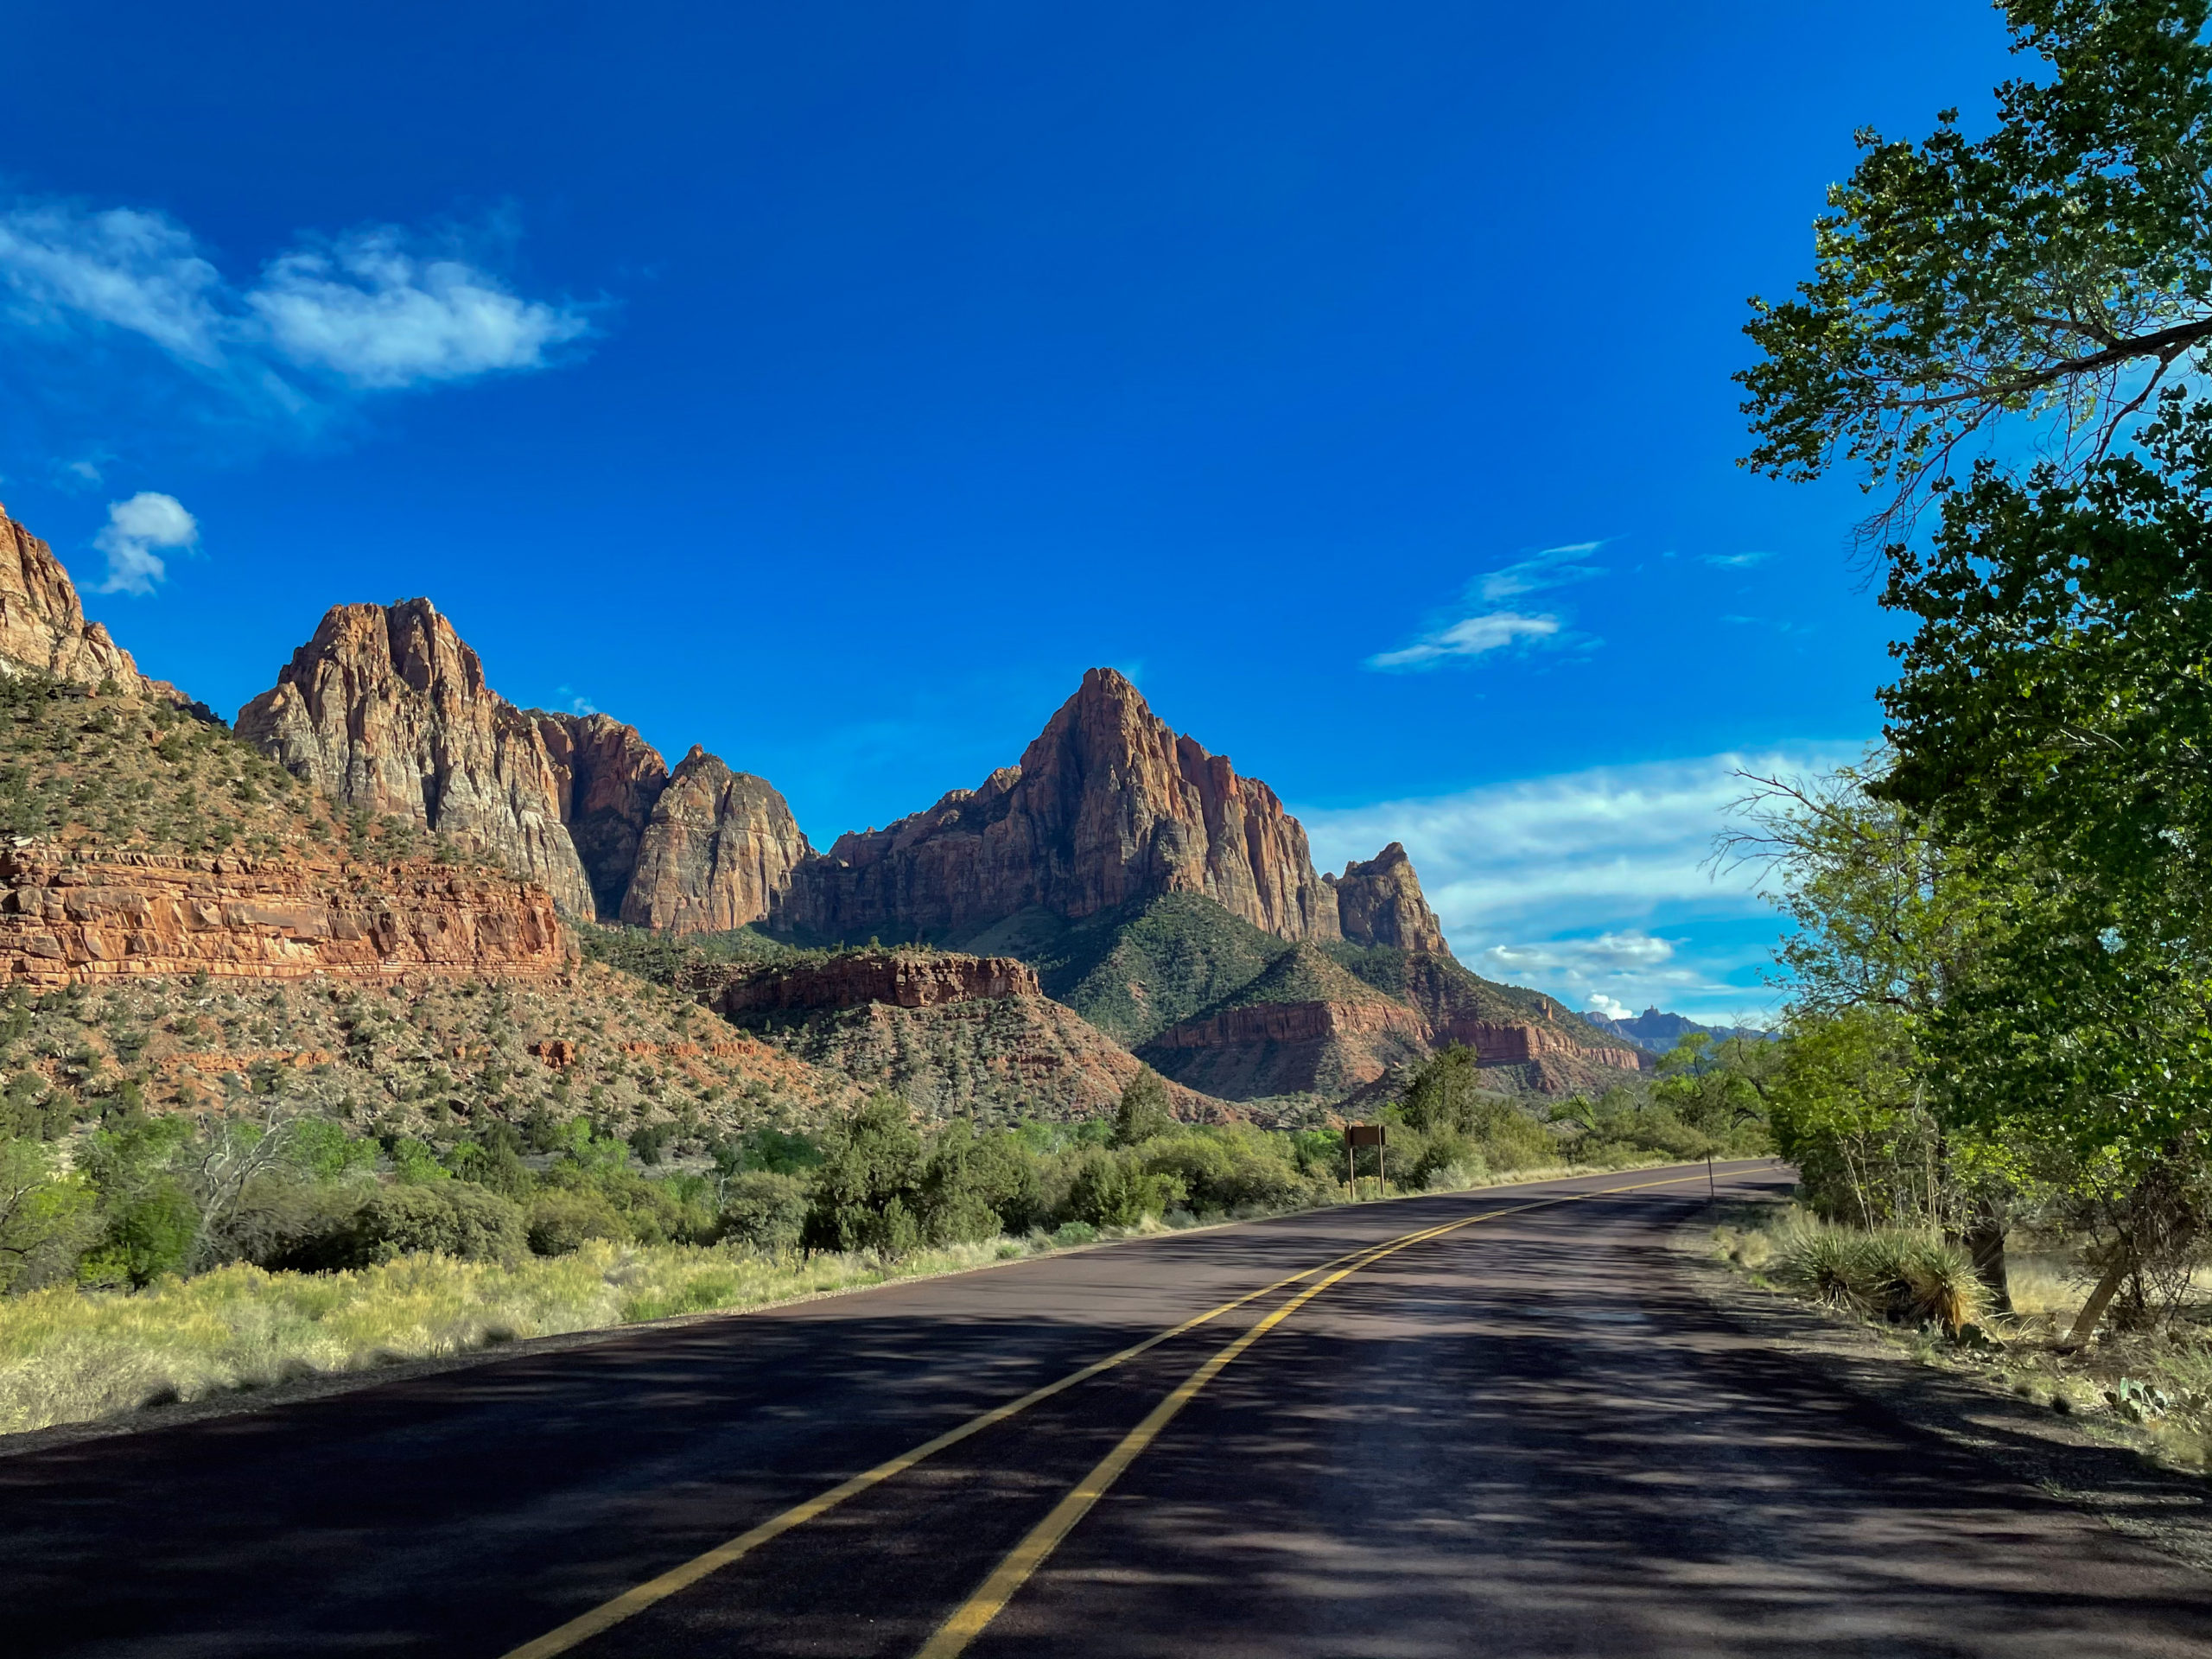 The road through Zion National Park